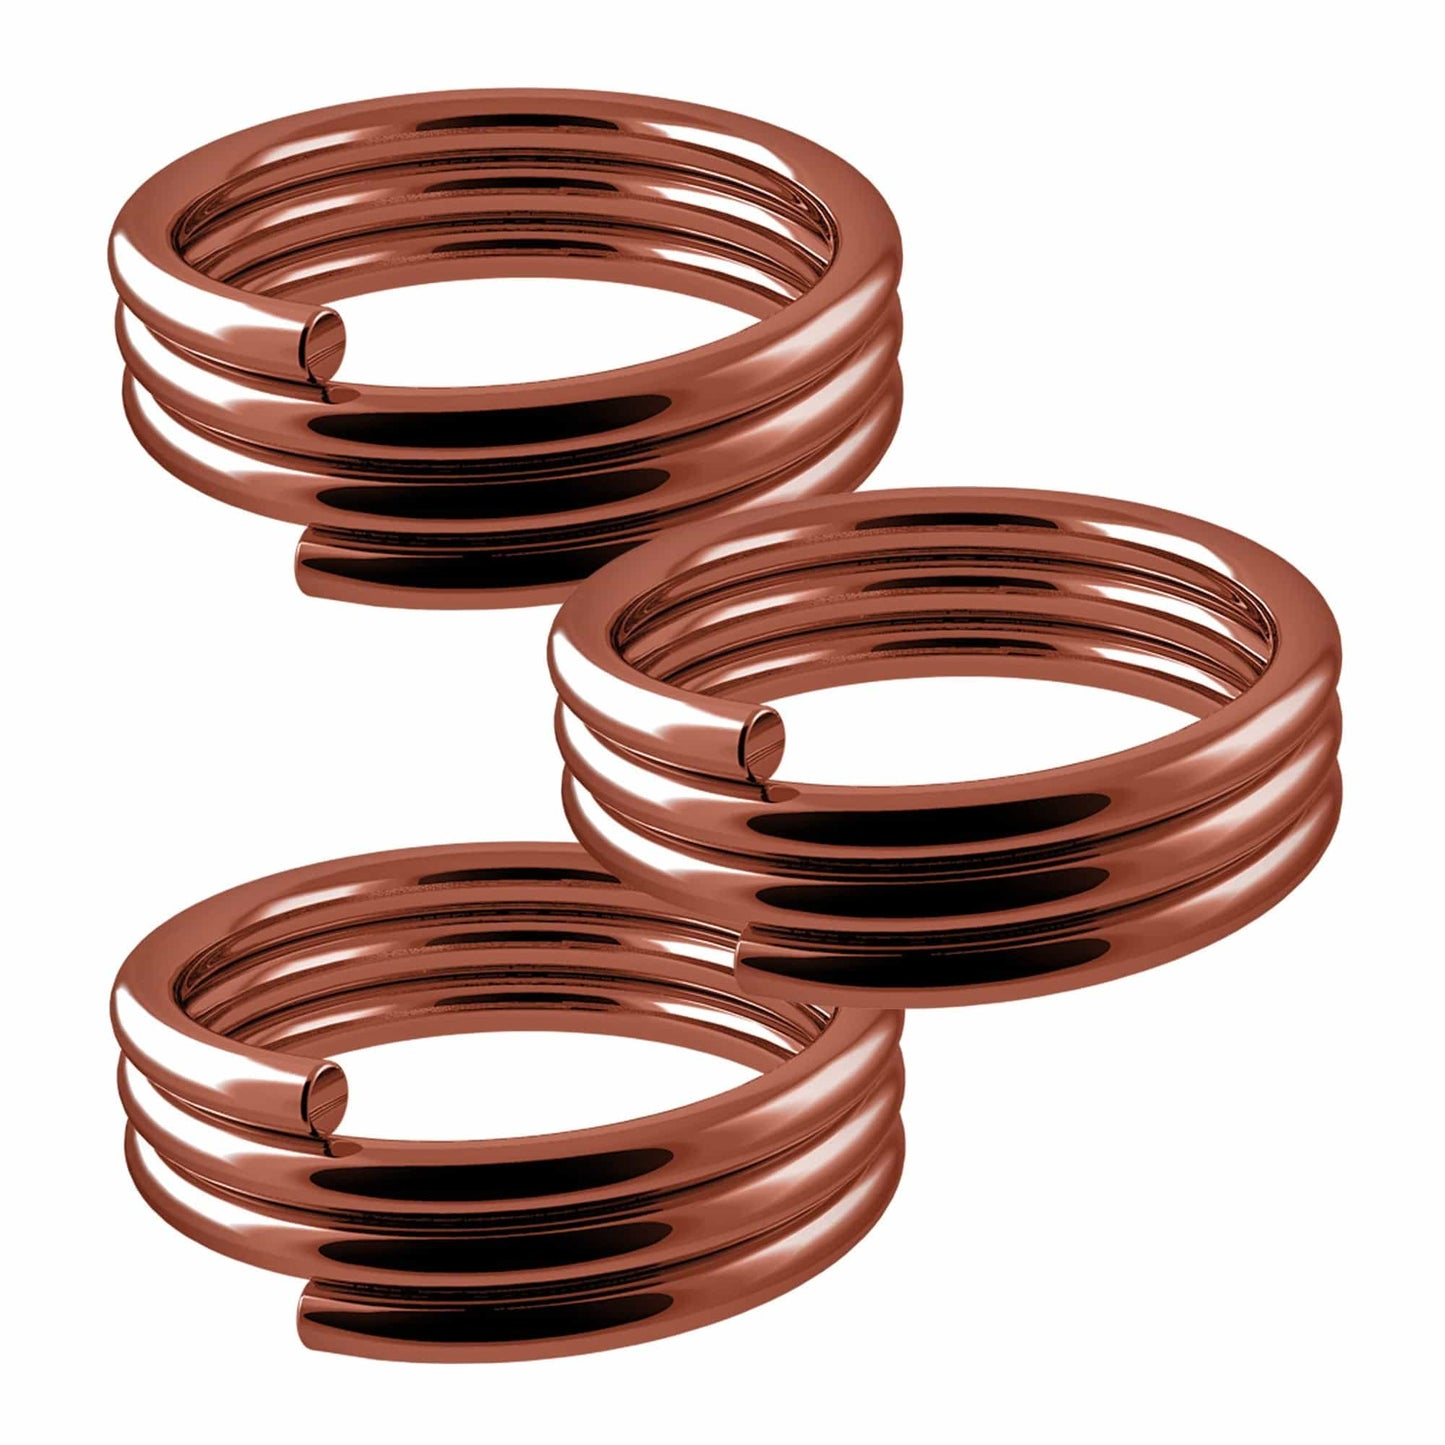 Designa Springs - for use with Nylon Shafts - 20 Sets (60) Bronze